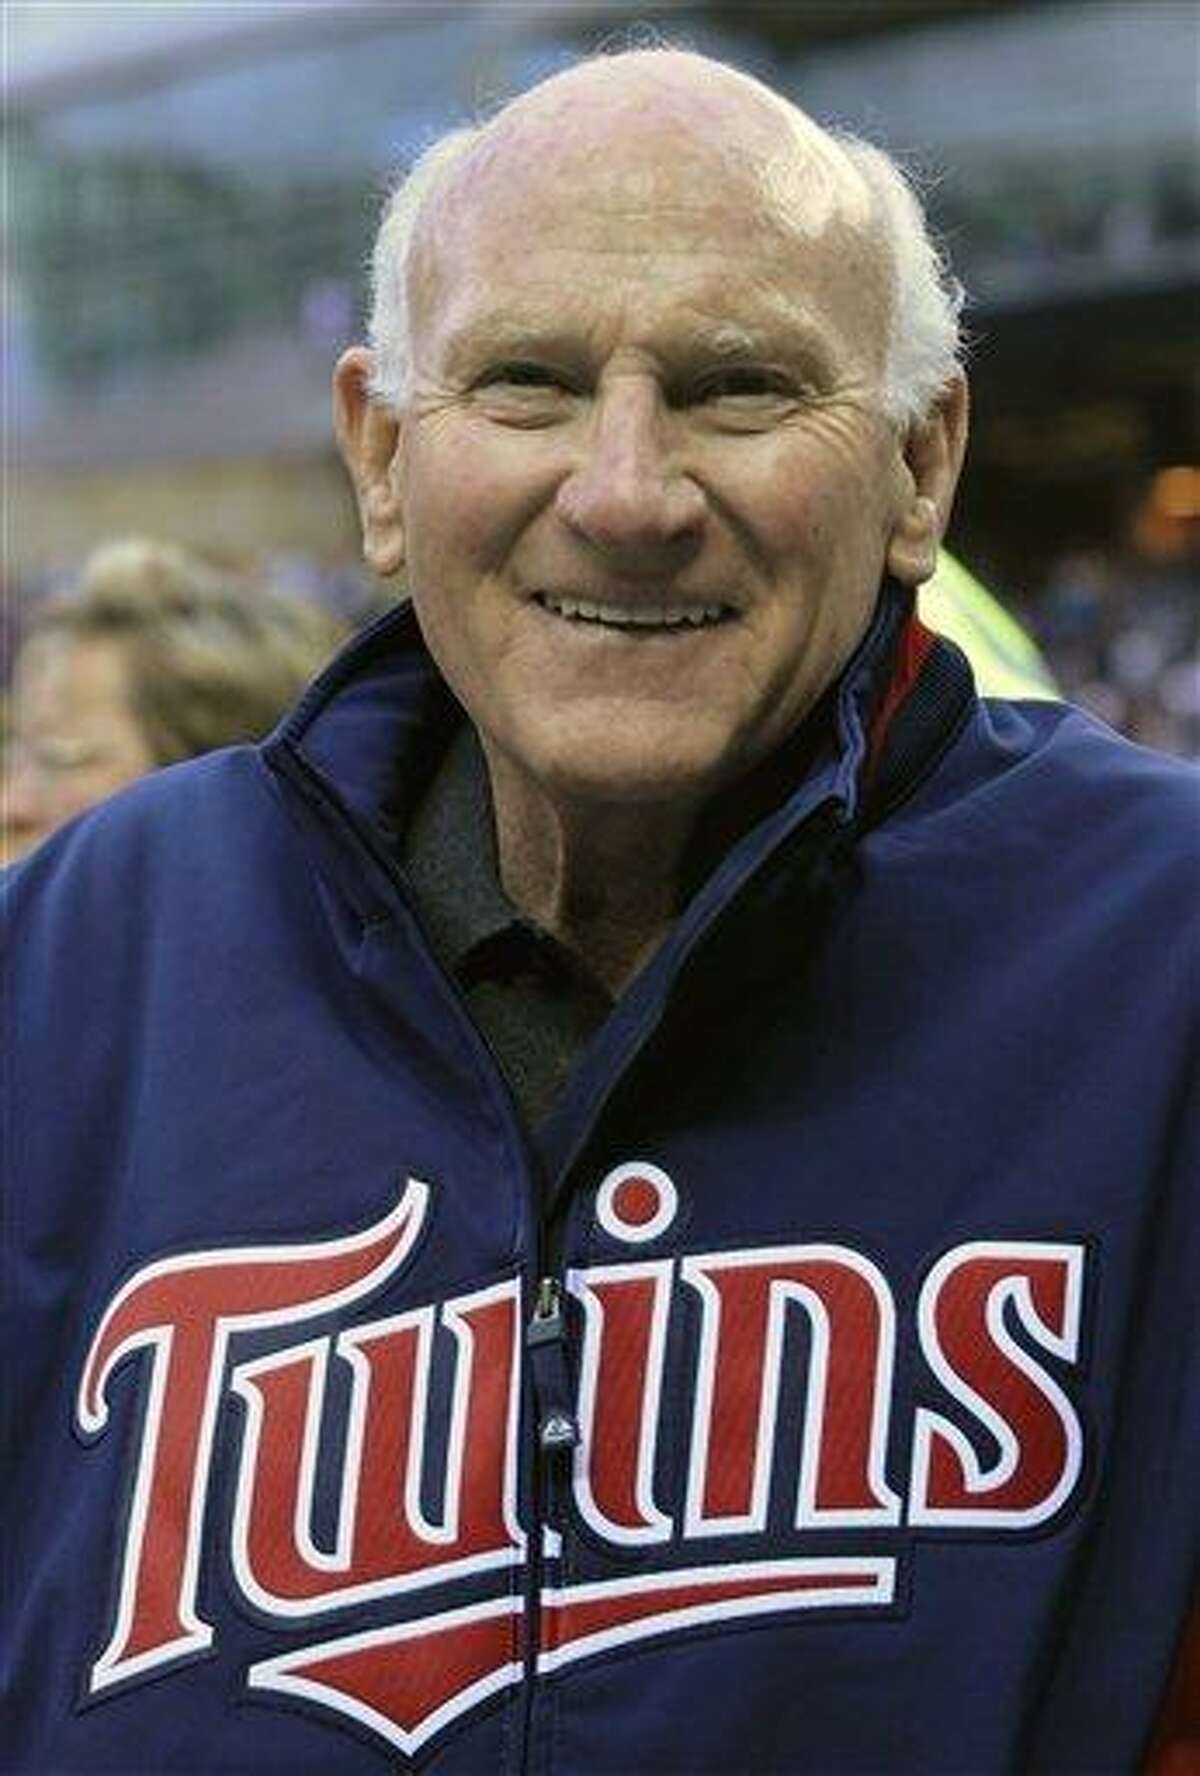 This Day In Sports: Harmon Killebrew elected to Hall of Fame